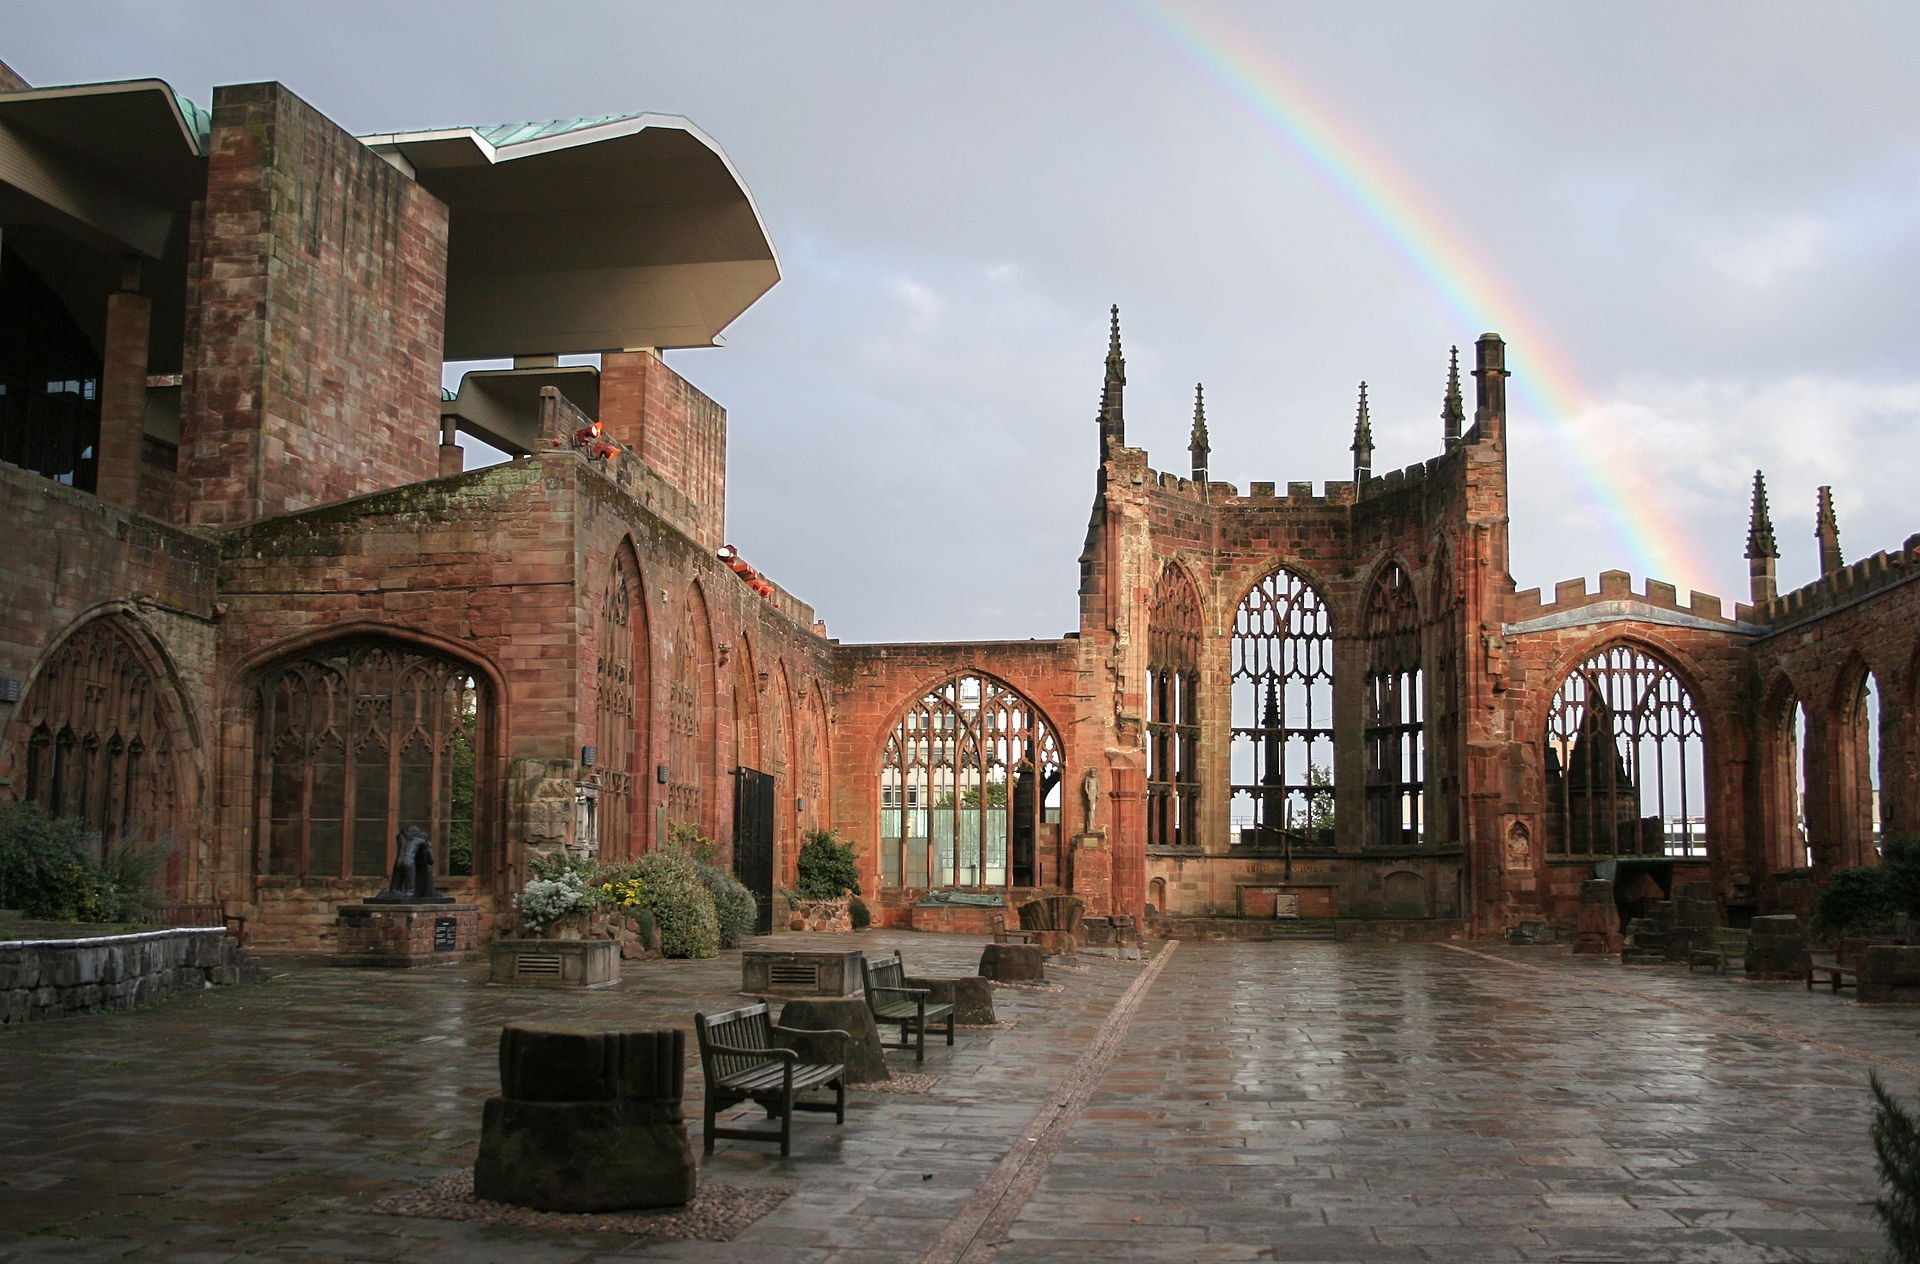 Coventry Cathedral Ruins View Image Source - Wikipedia en.wikipedia.org:wiki:Coventry_Cathedral.jpg